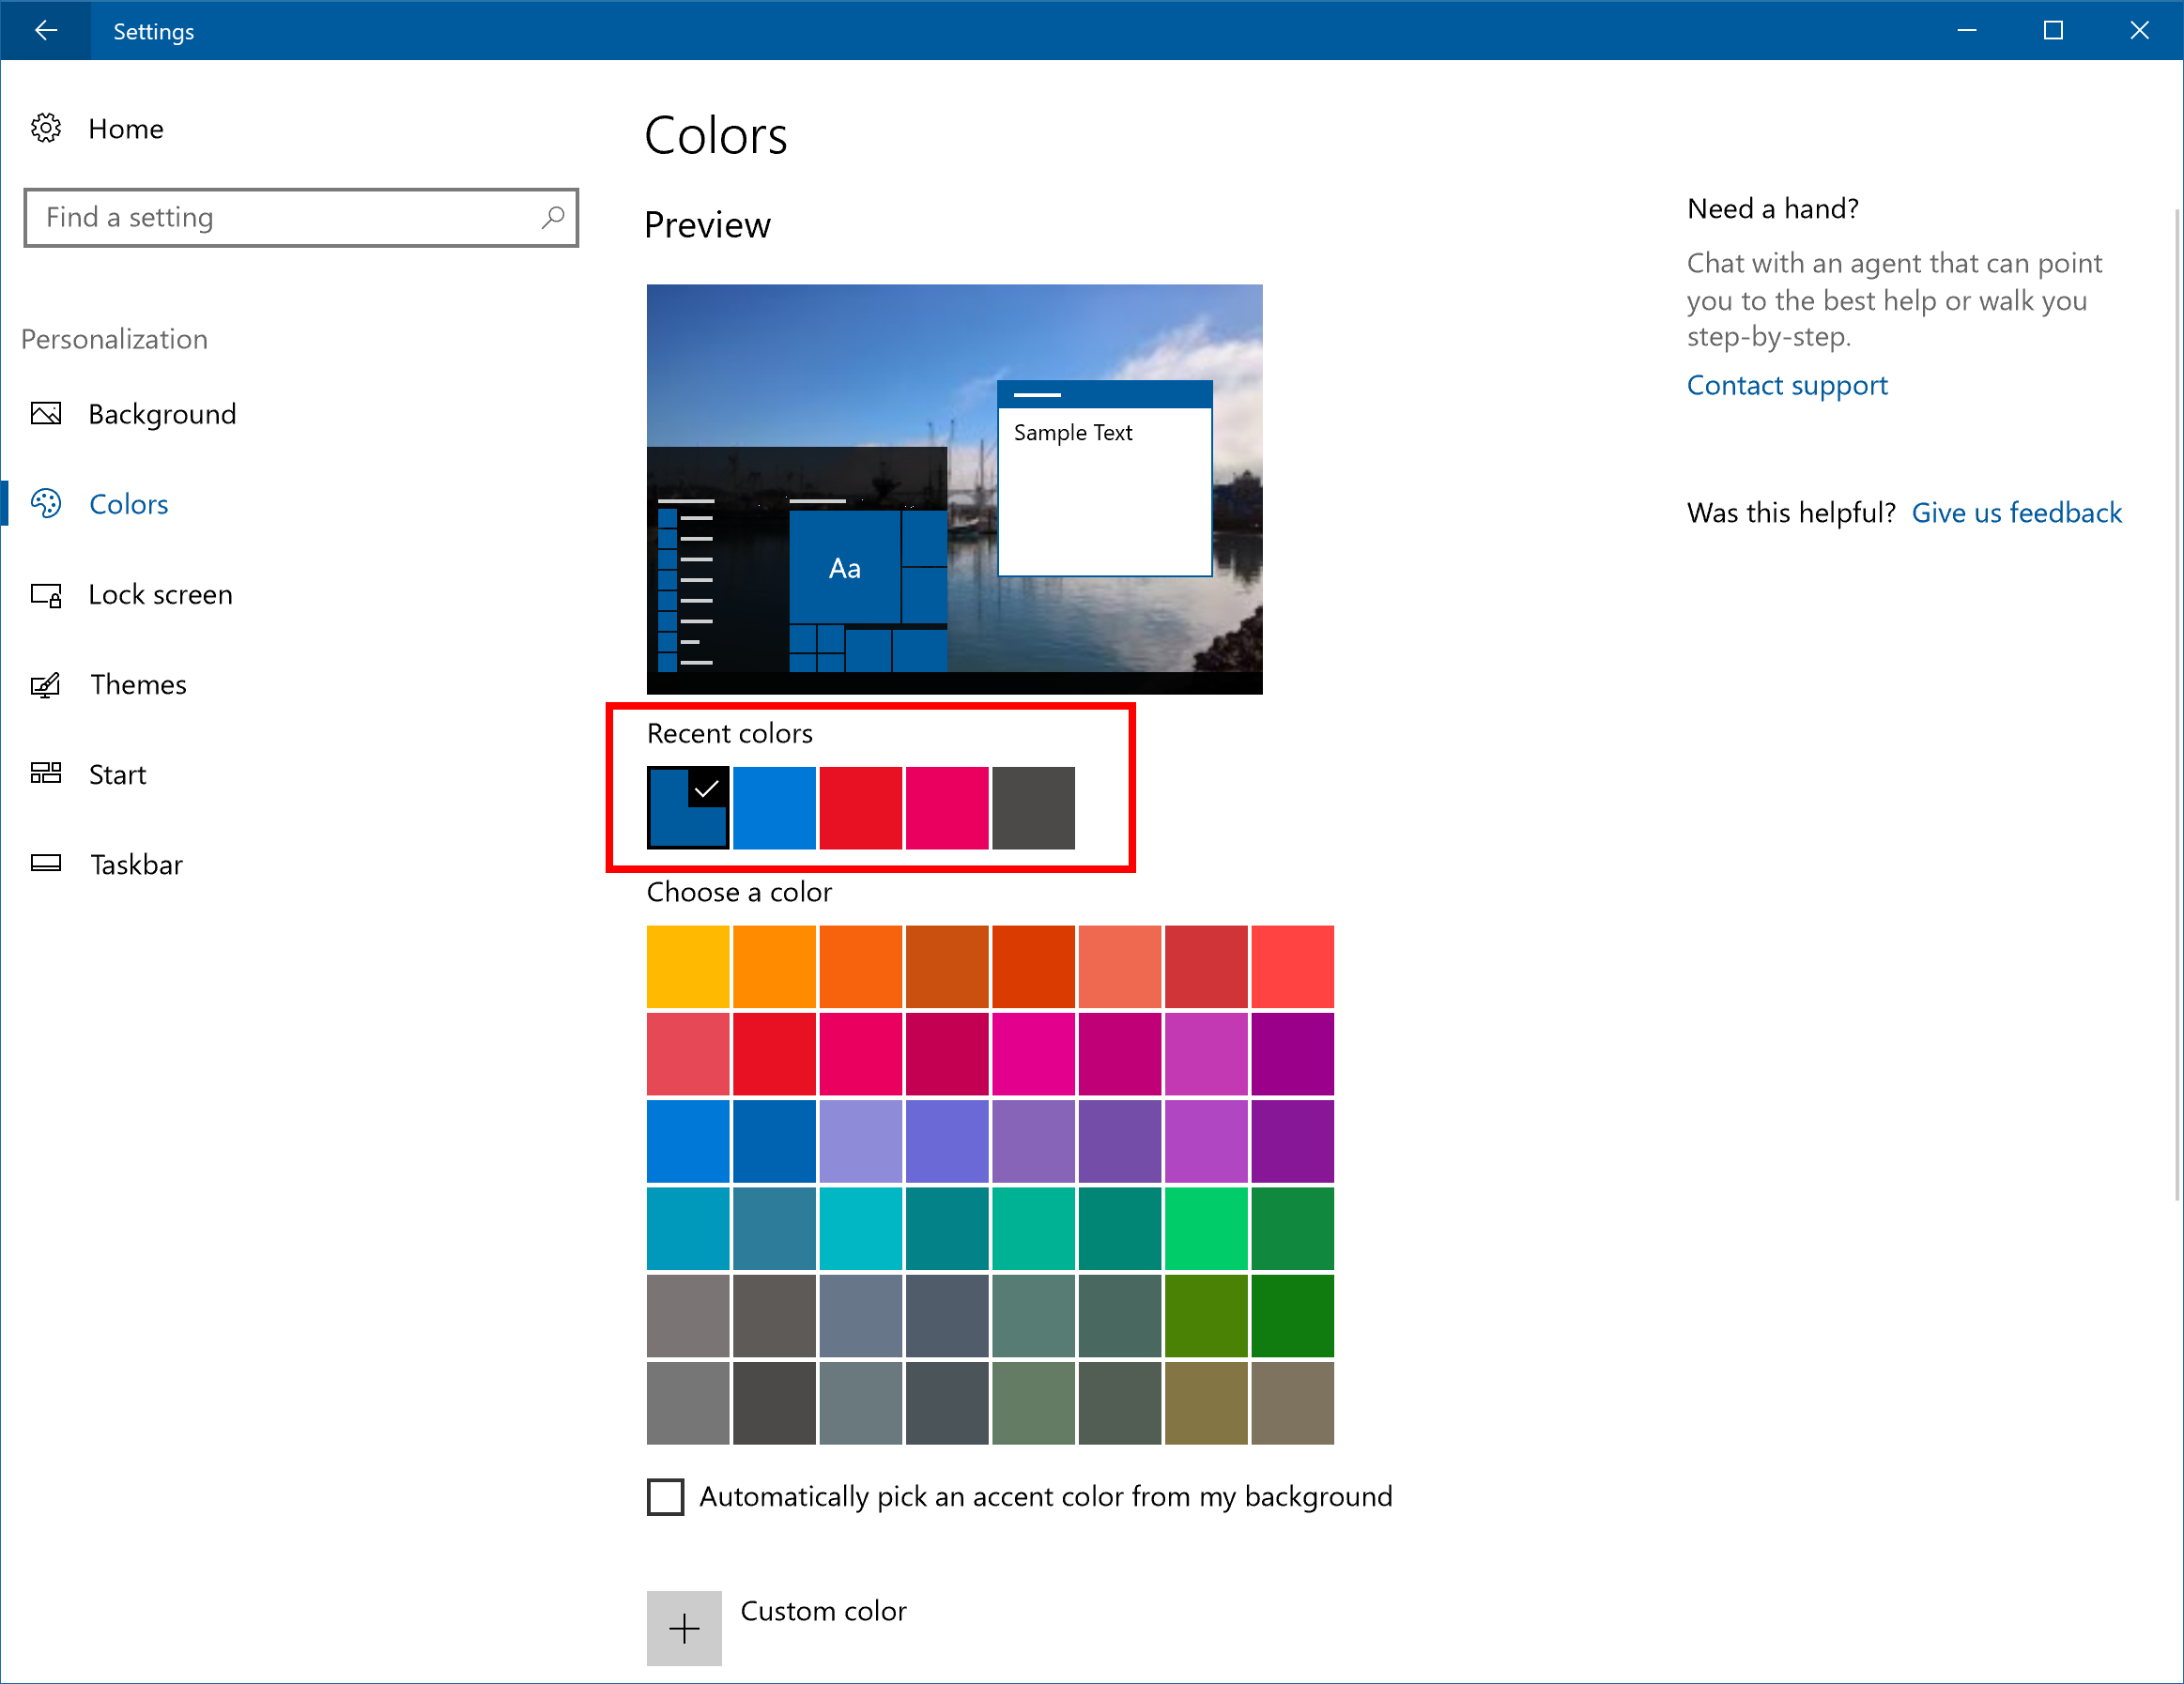 Windows Personalization now supports recent colors